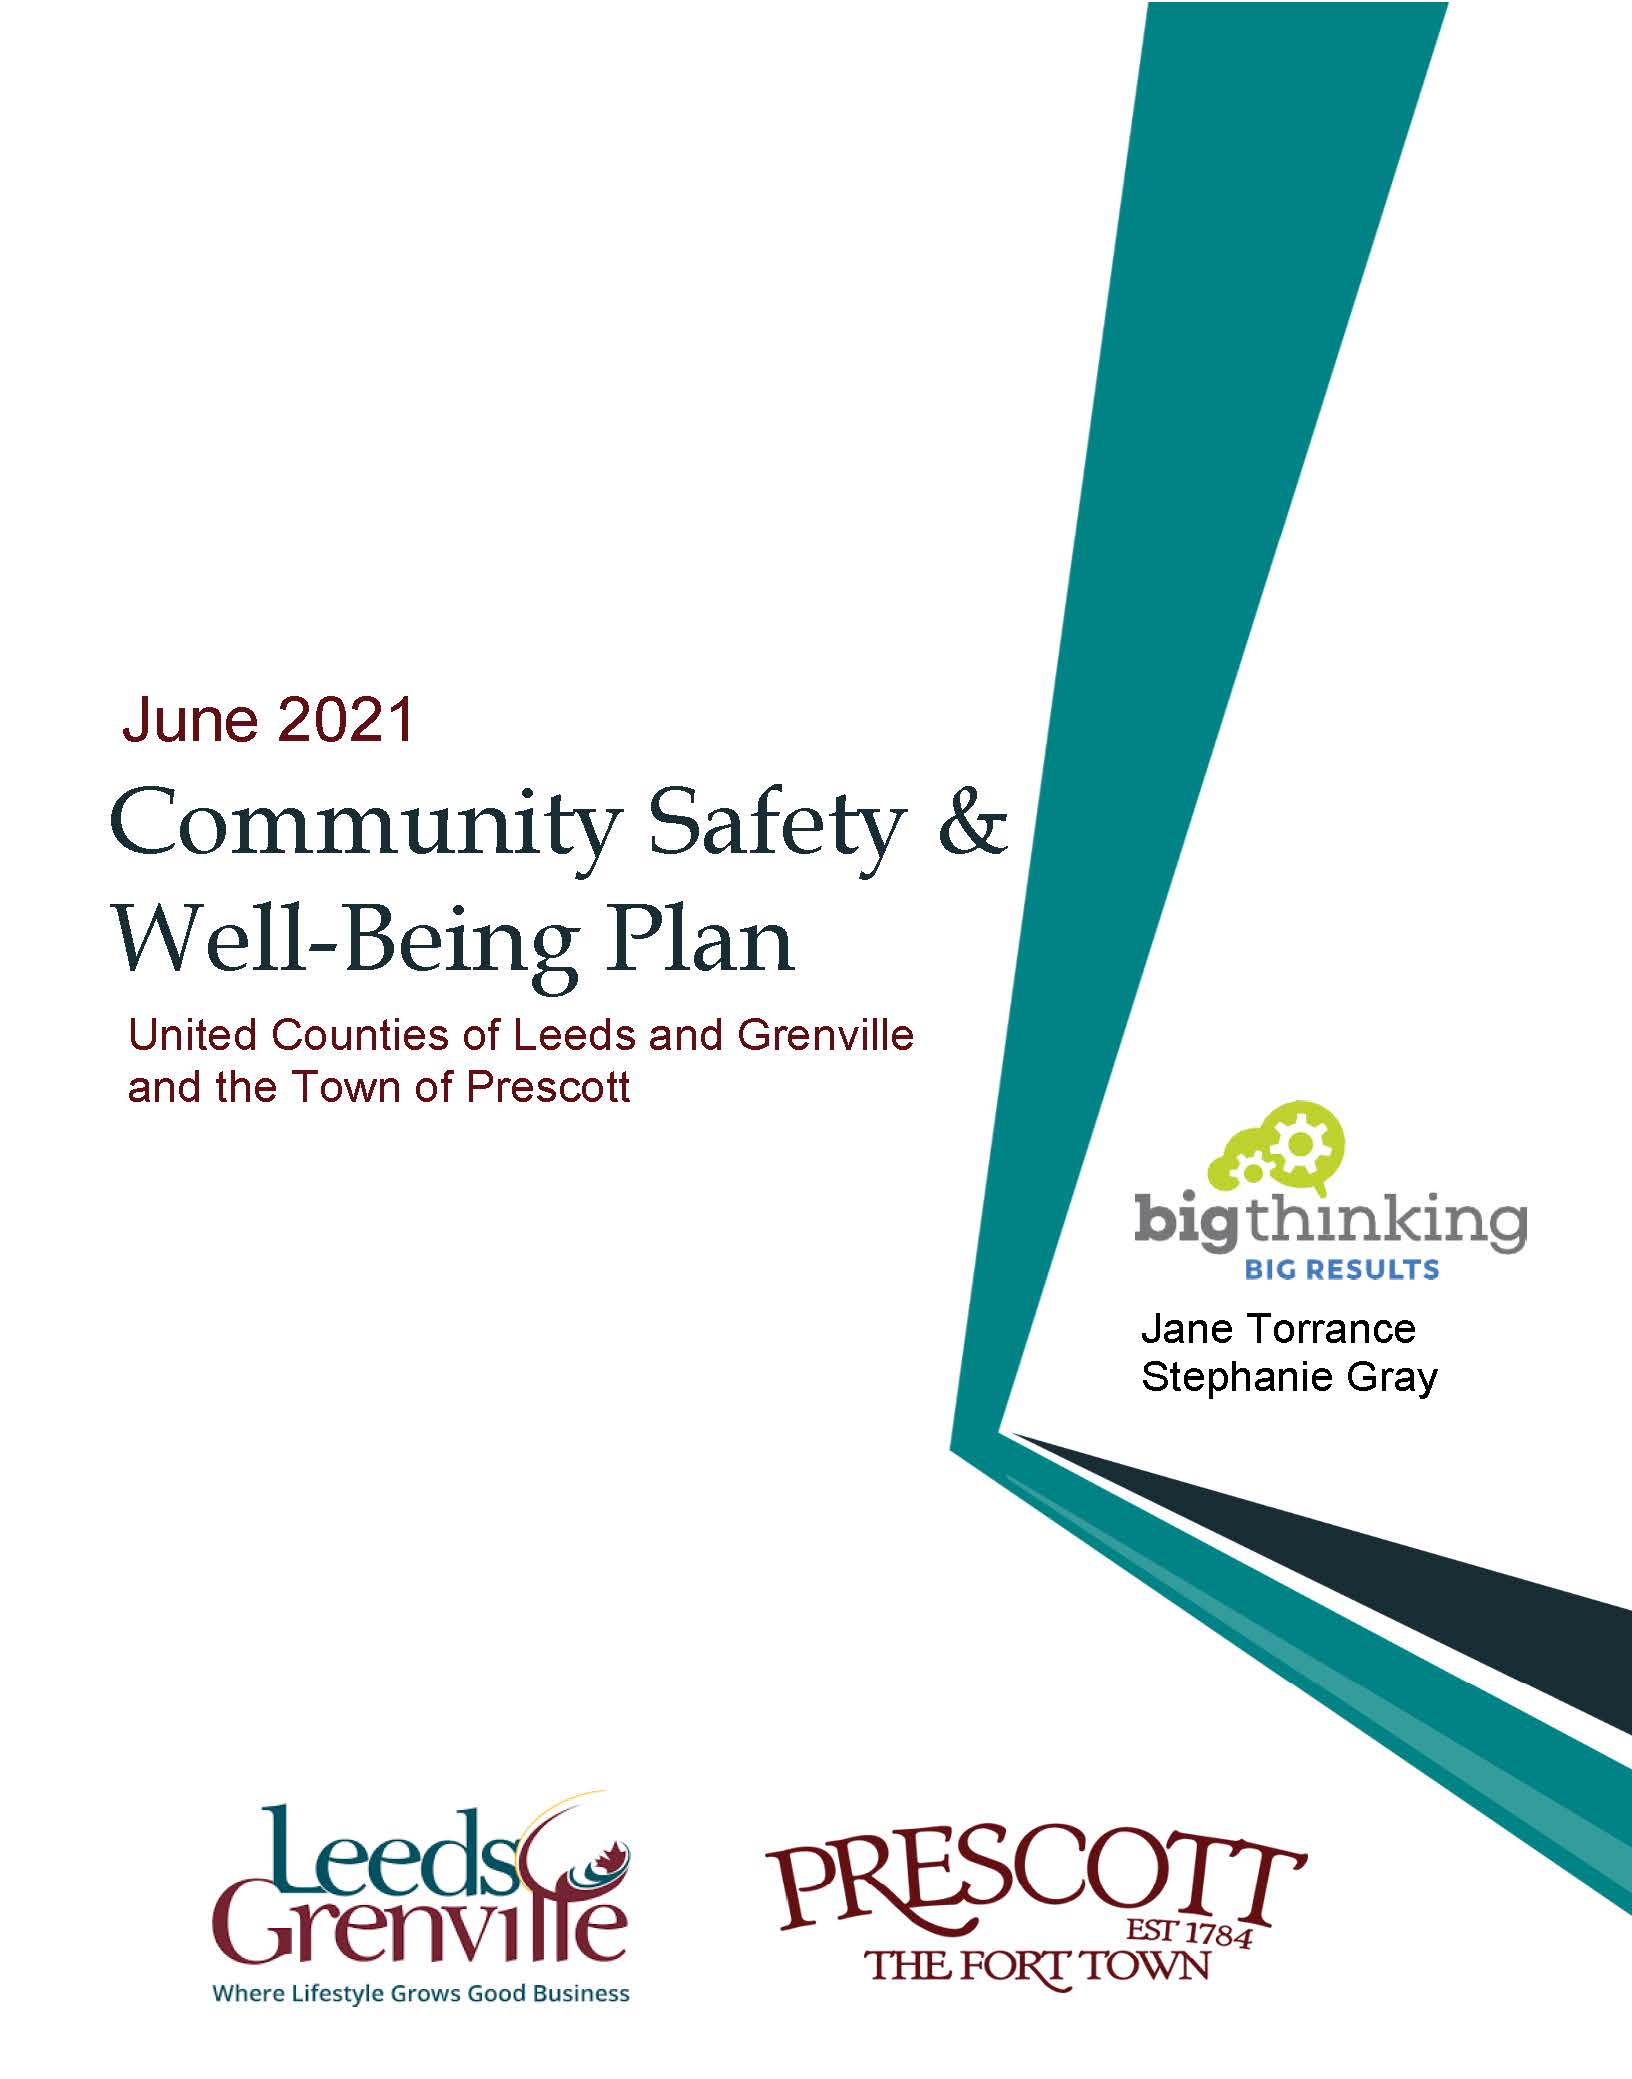 Cover page of the June 2021 Community Safety & Well-Being Plan for the United Counties of Leeds & Grenville and the Town of Prescott